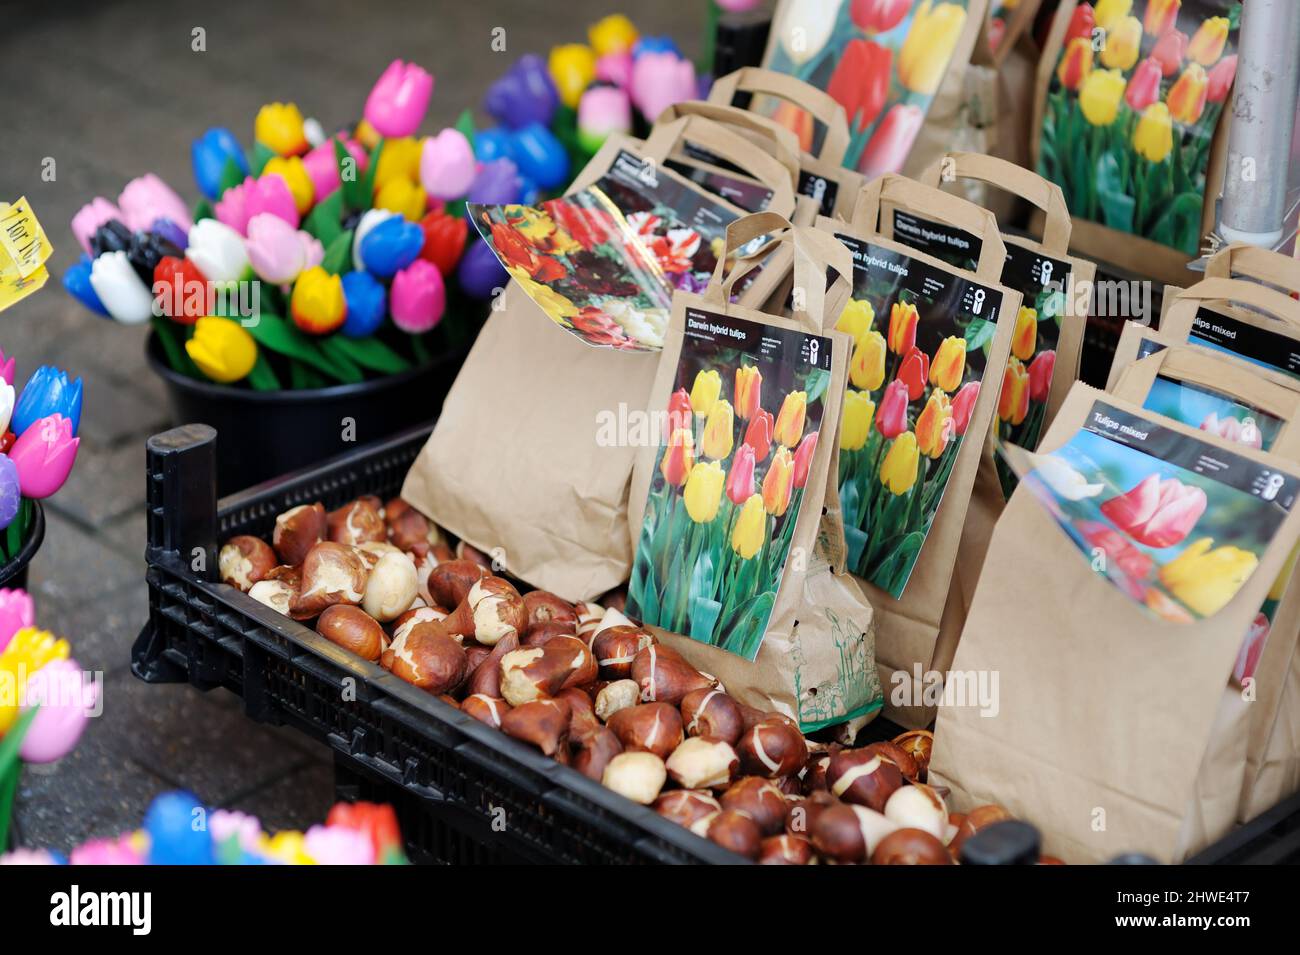 AMSTERDAM - AUGUST 2011: Assorted flower bulbs and souvenirs sold in flower shop in Amsterdam, Netherlands, Holland. Stock Photo